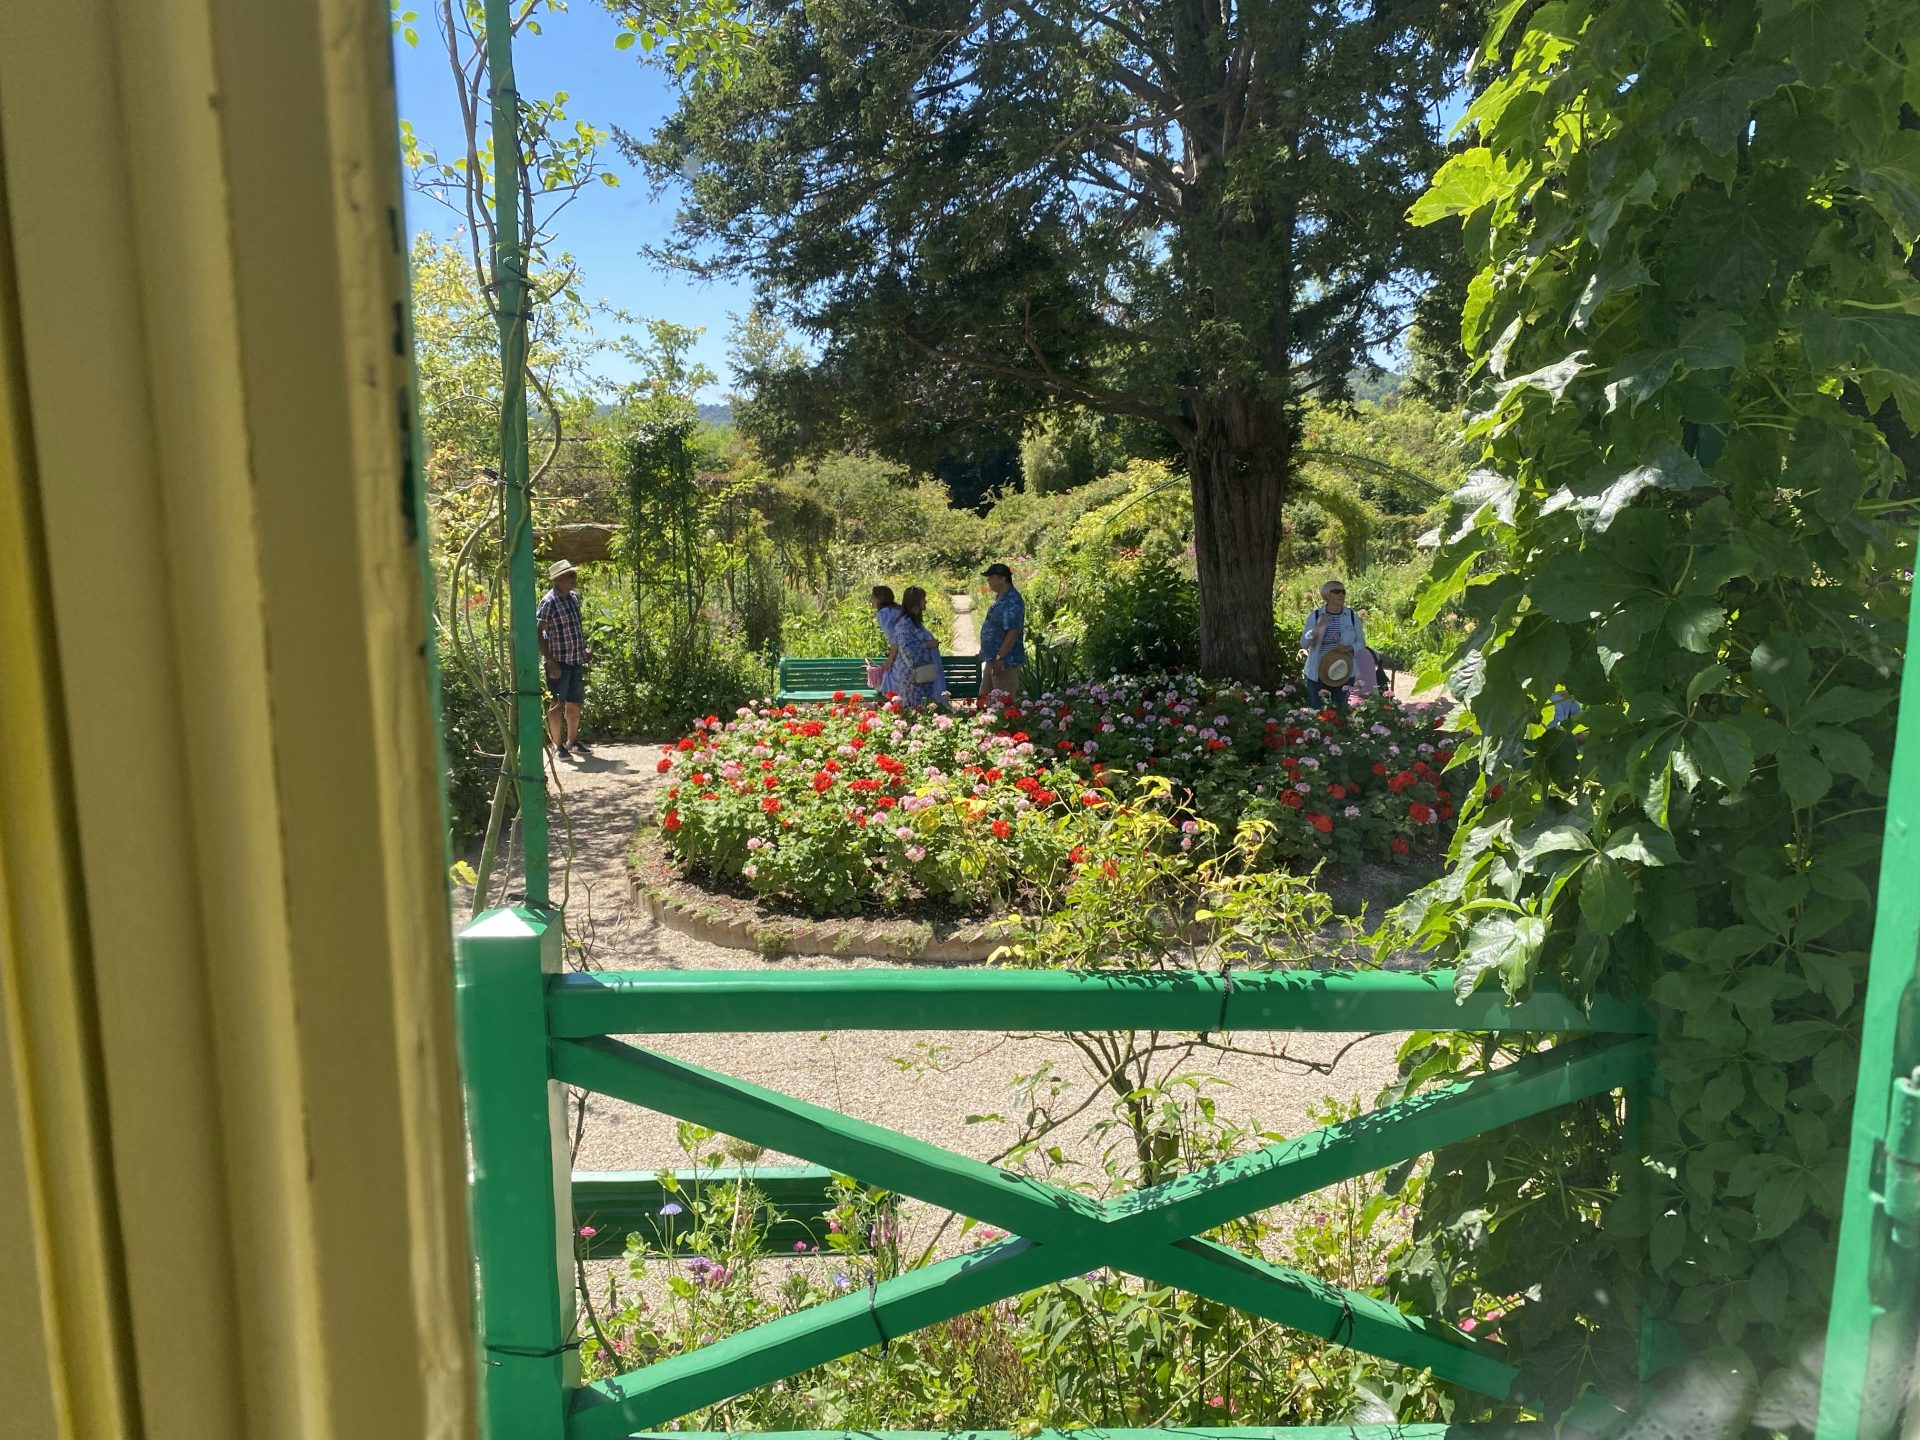 View from the window of the house of Claude Monet at Giverny